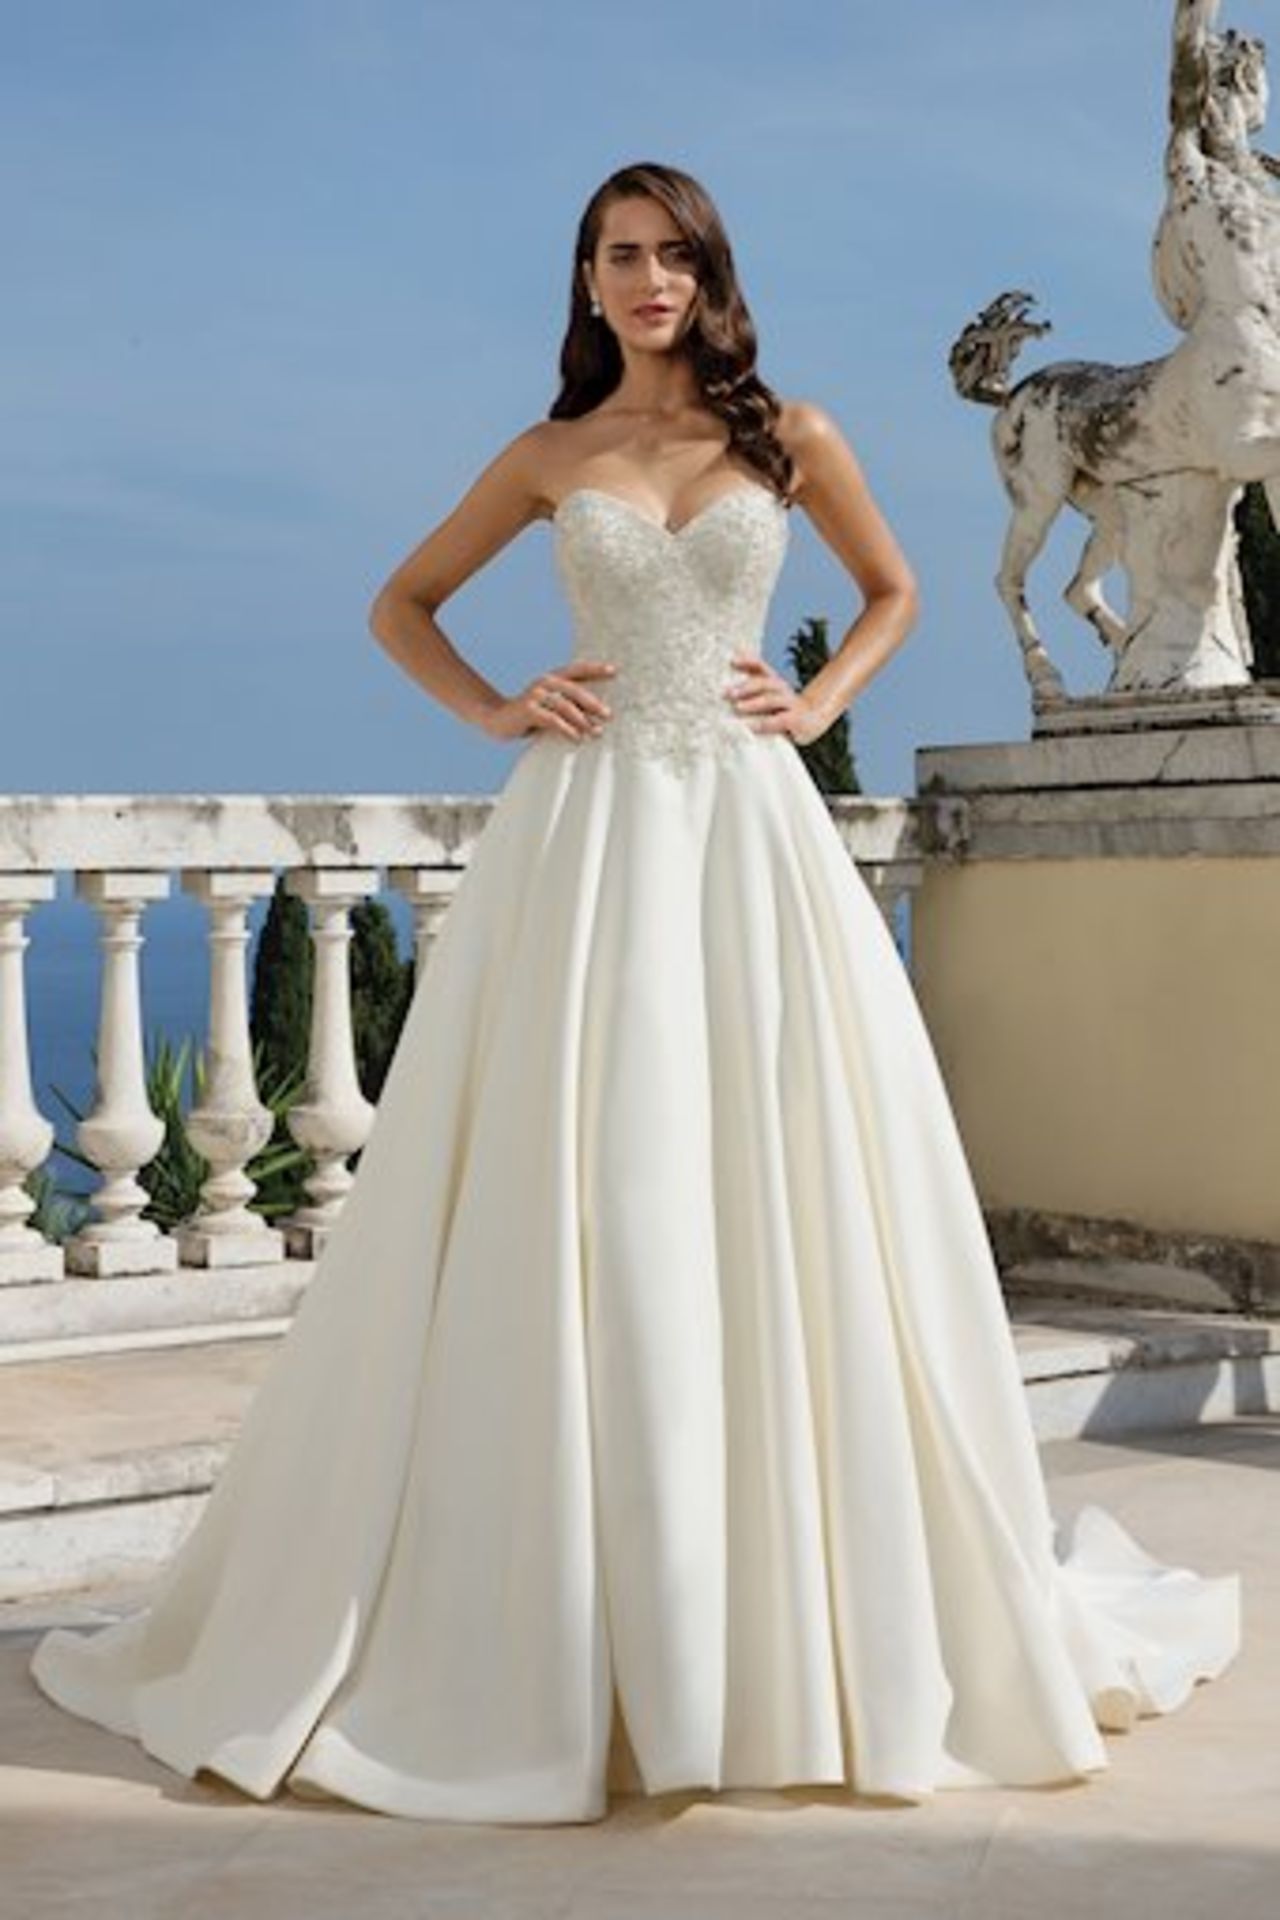 1 x Justin Alexander Strapless Wedding Dress With Allover Beaded Bodice - UK Size 14 - RRP £1,854 - Image 3 of 4